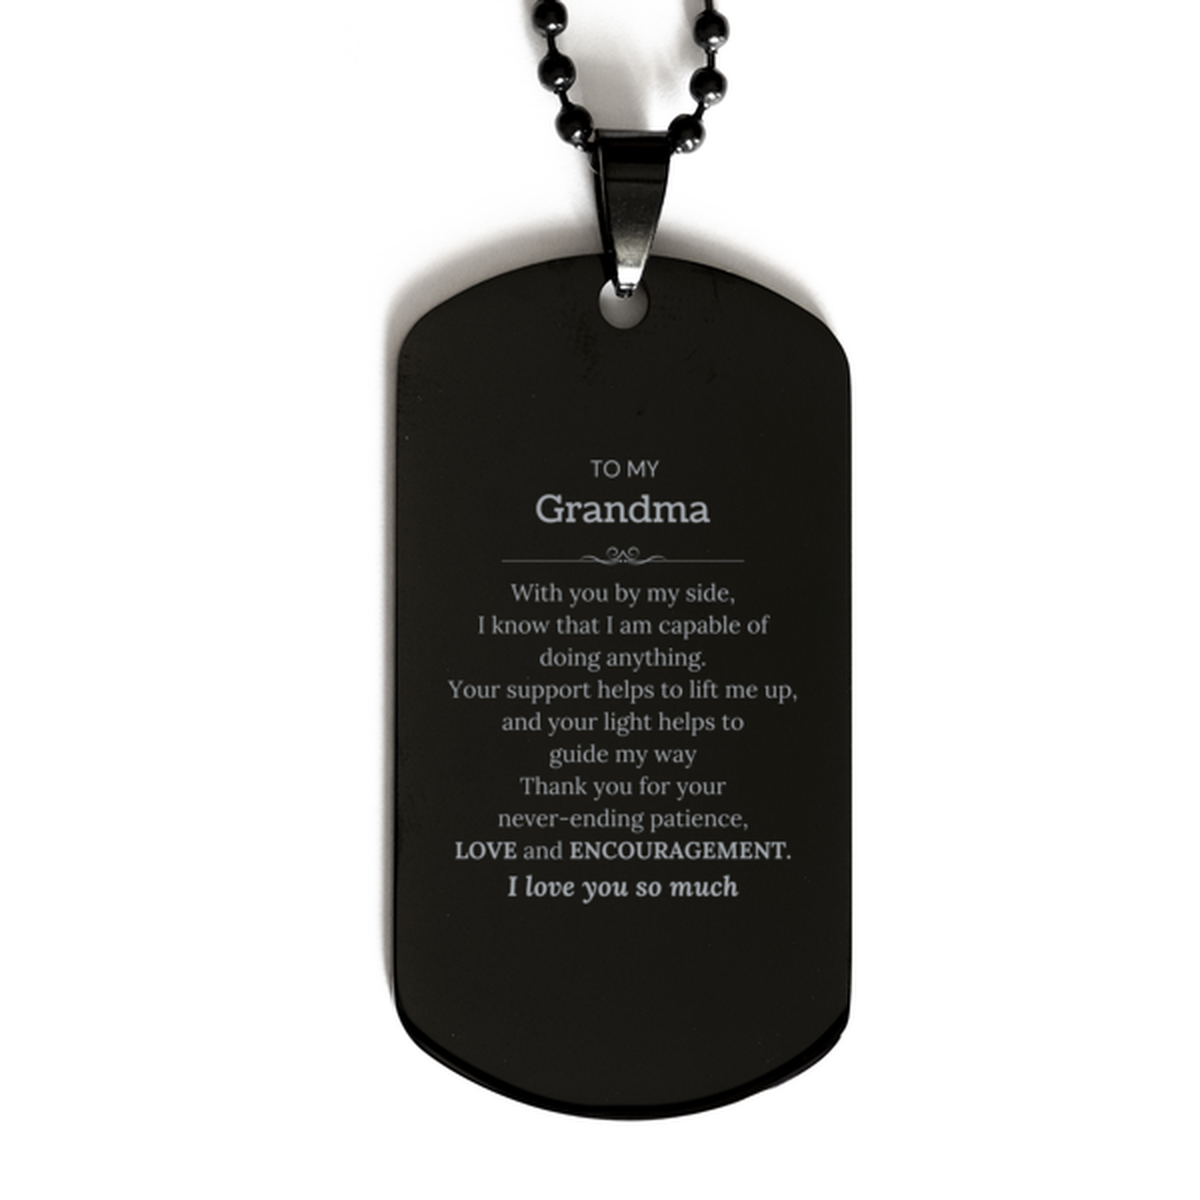 Appreciation Grandma Black Dog Tag Gifts, To My Grandma Birthday Christmas Wedding Keepsake Gifts for Grandma With you by my side, I know that I am capable of doing anything. I love you so much